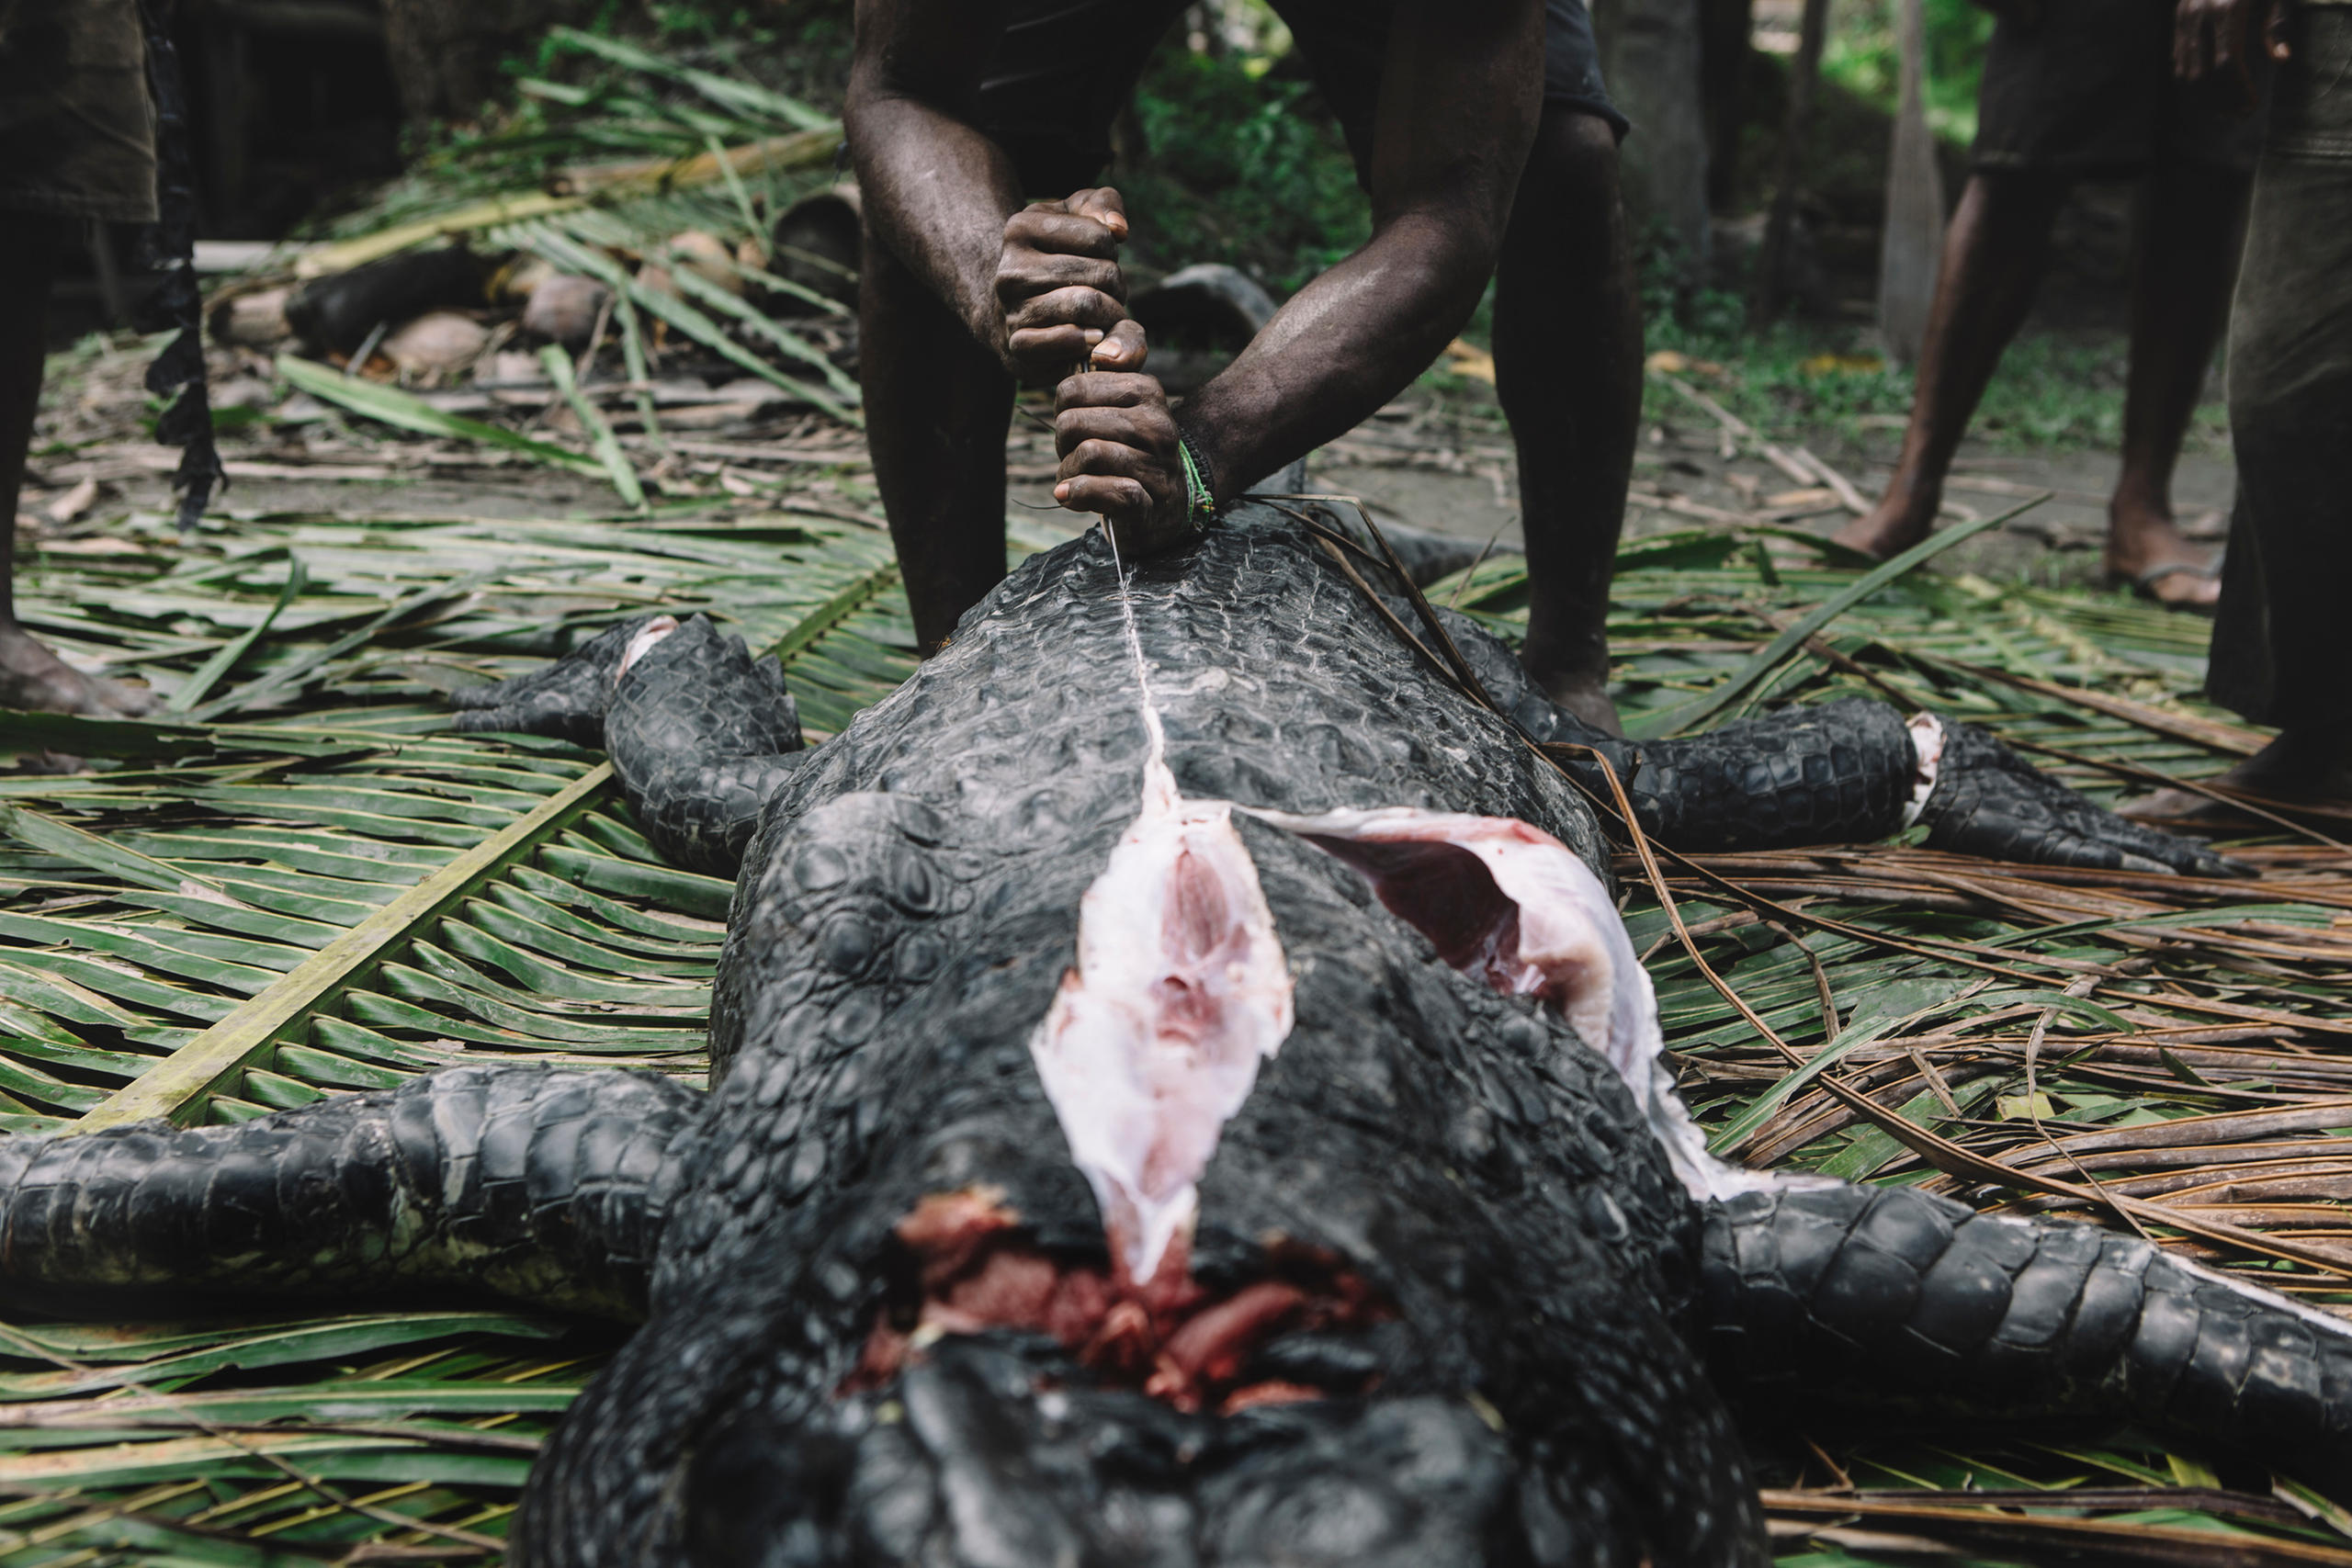 A hunted crocodile is being sliced by a man in Papua New Guinea